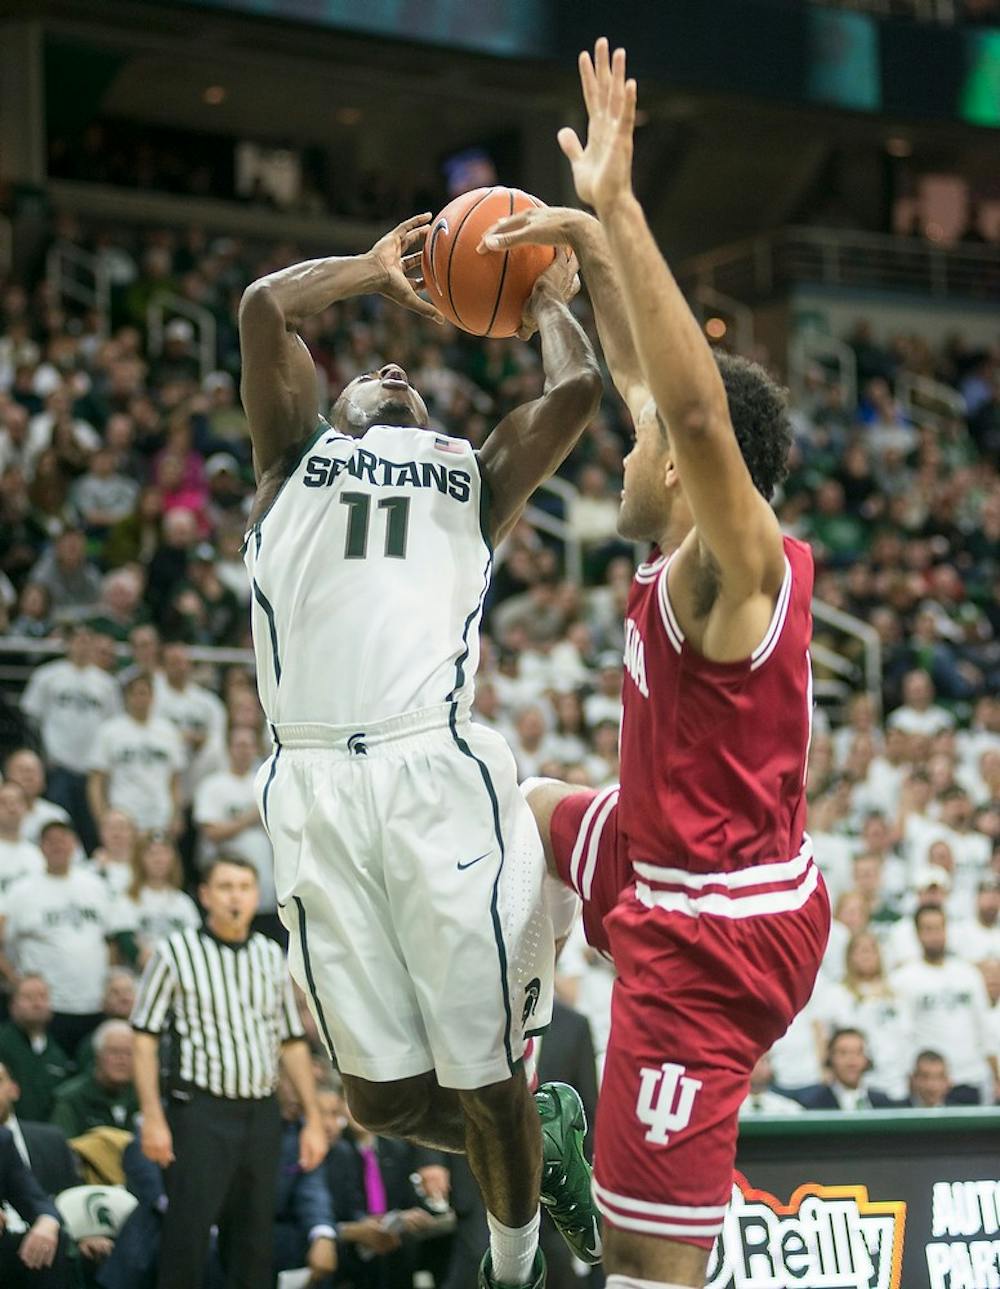 <p>Freshman guard Lourawls 'Tum Tum' Nairn Jr. attempts a point Jan. 5, 2014, during the game against Indiana at Breslin Center. The Spartans defeated the Hoosiers, 70-50. Erin Hampton/The State News</p>